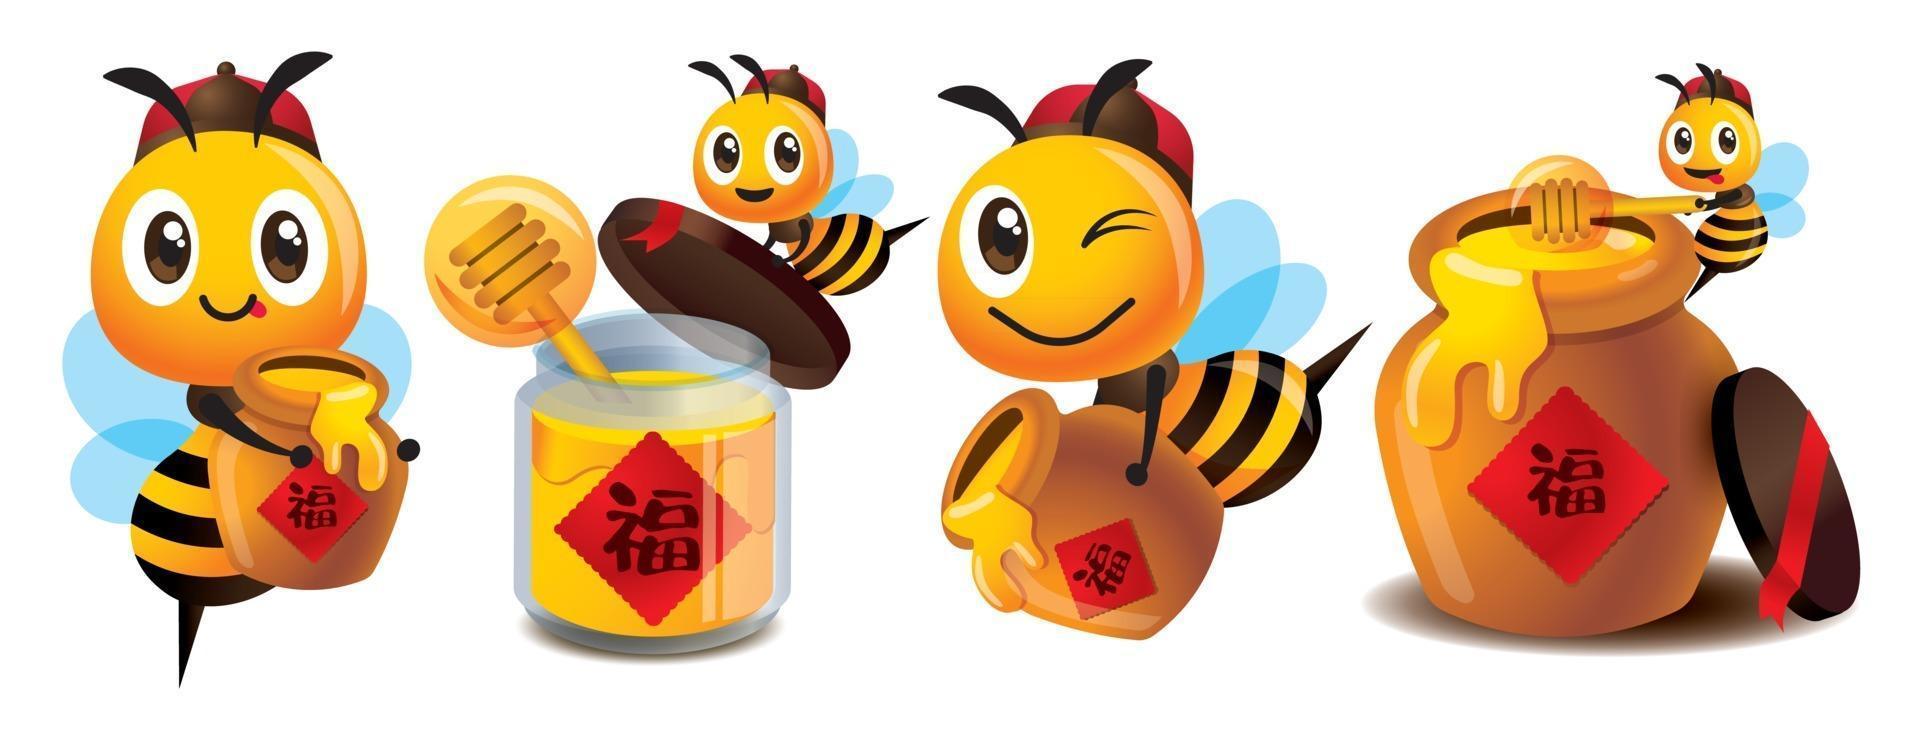 Cartoon cute bee celebrating chinese new year with Chinese couplet on honey pots vector